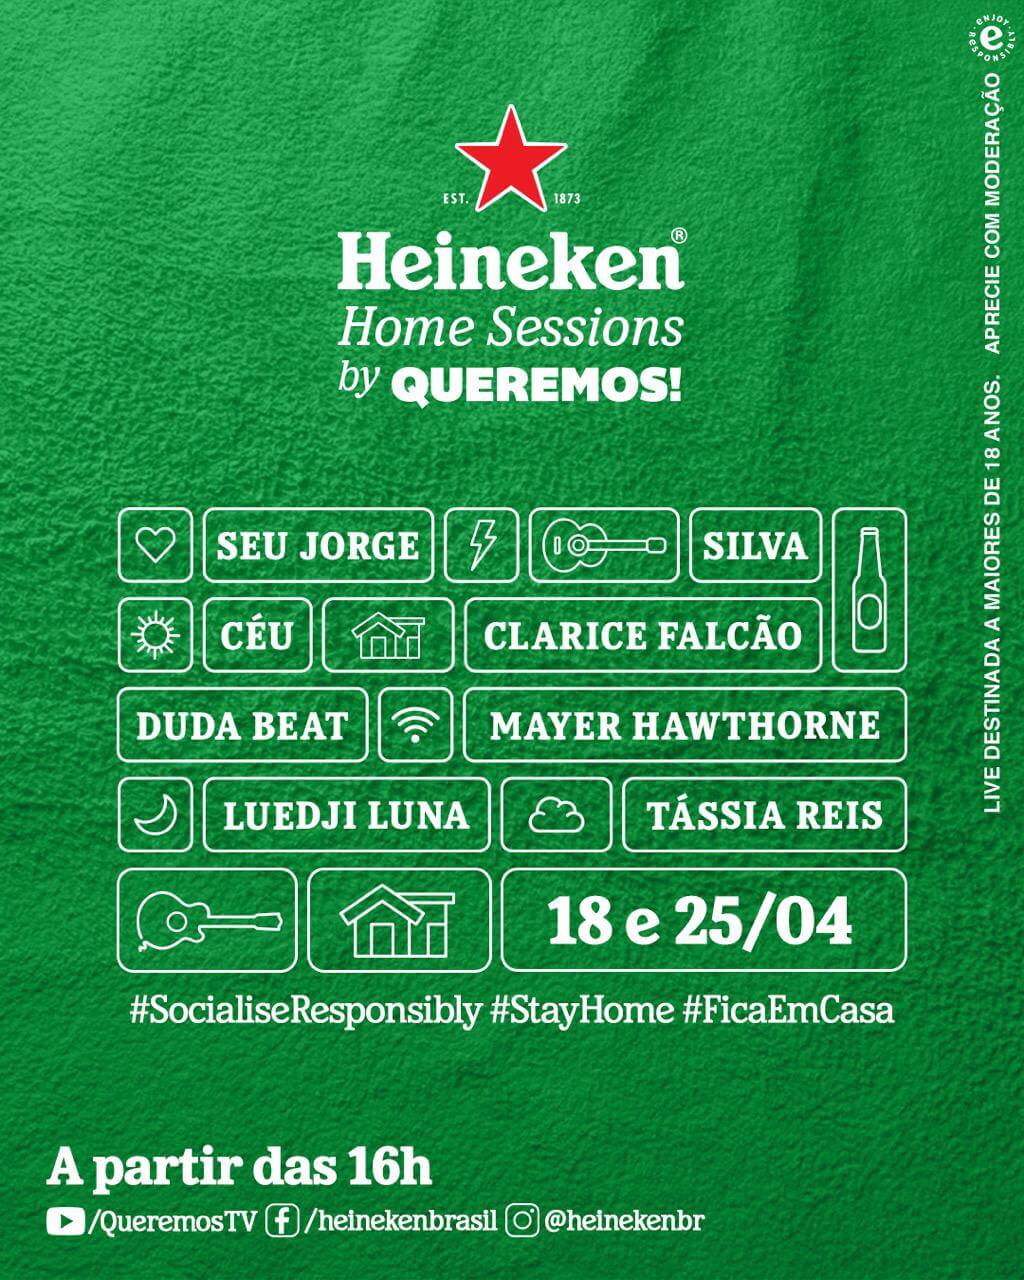 Line-up Heineken Home Sessions by Queremos!